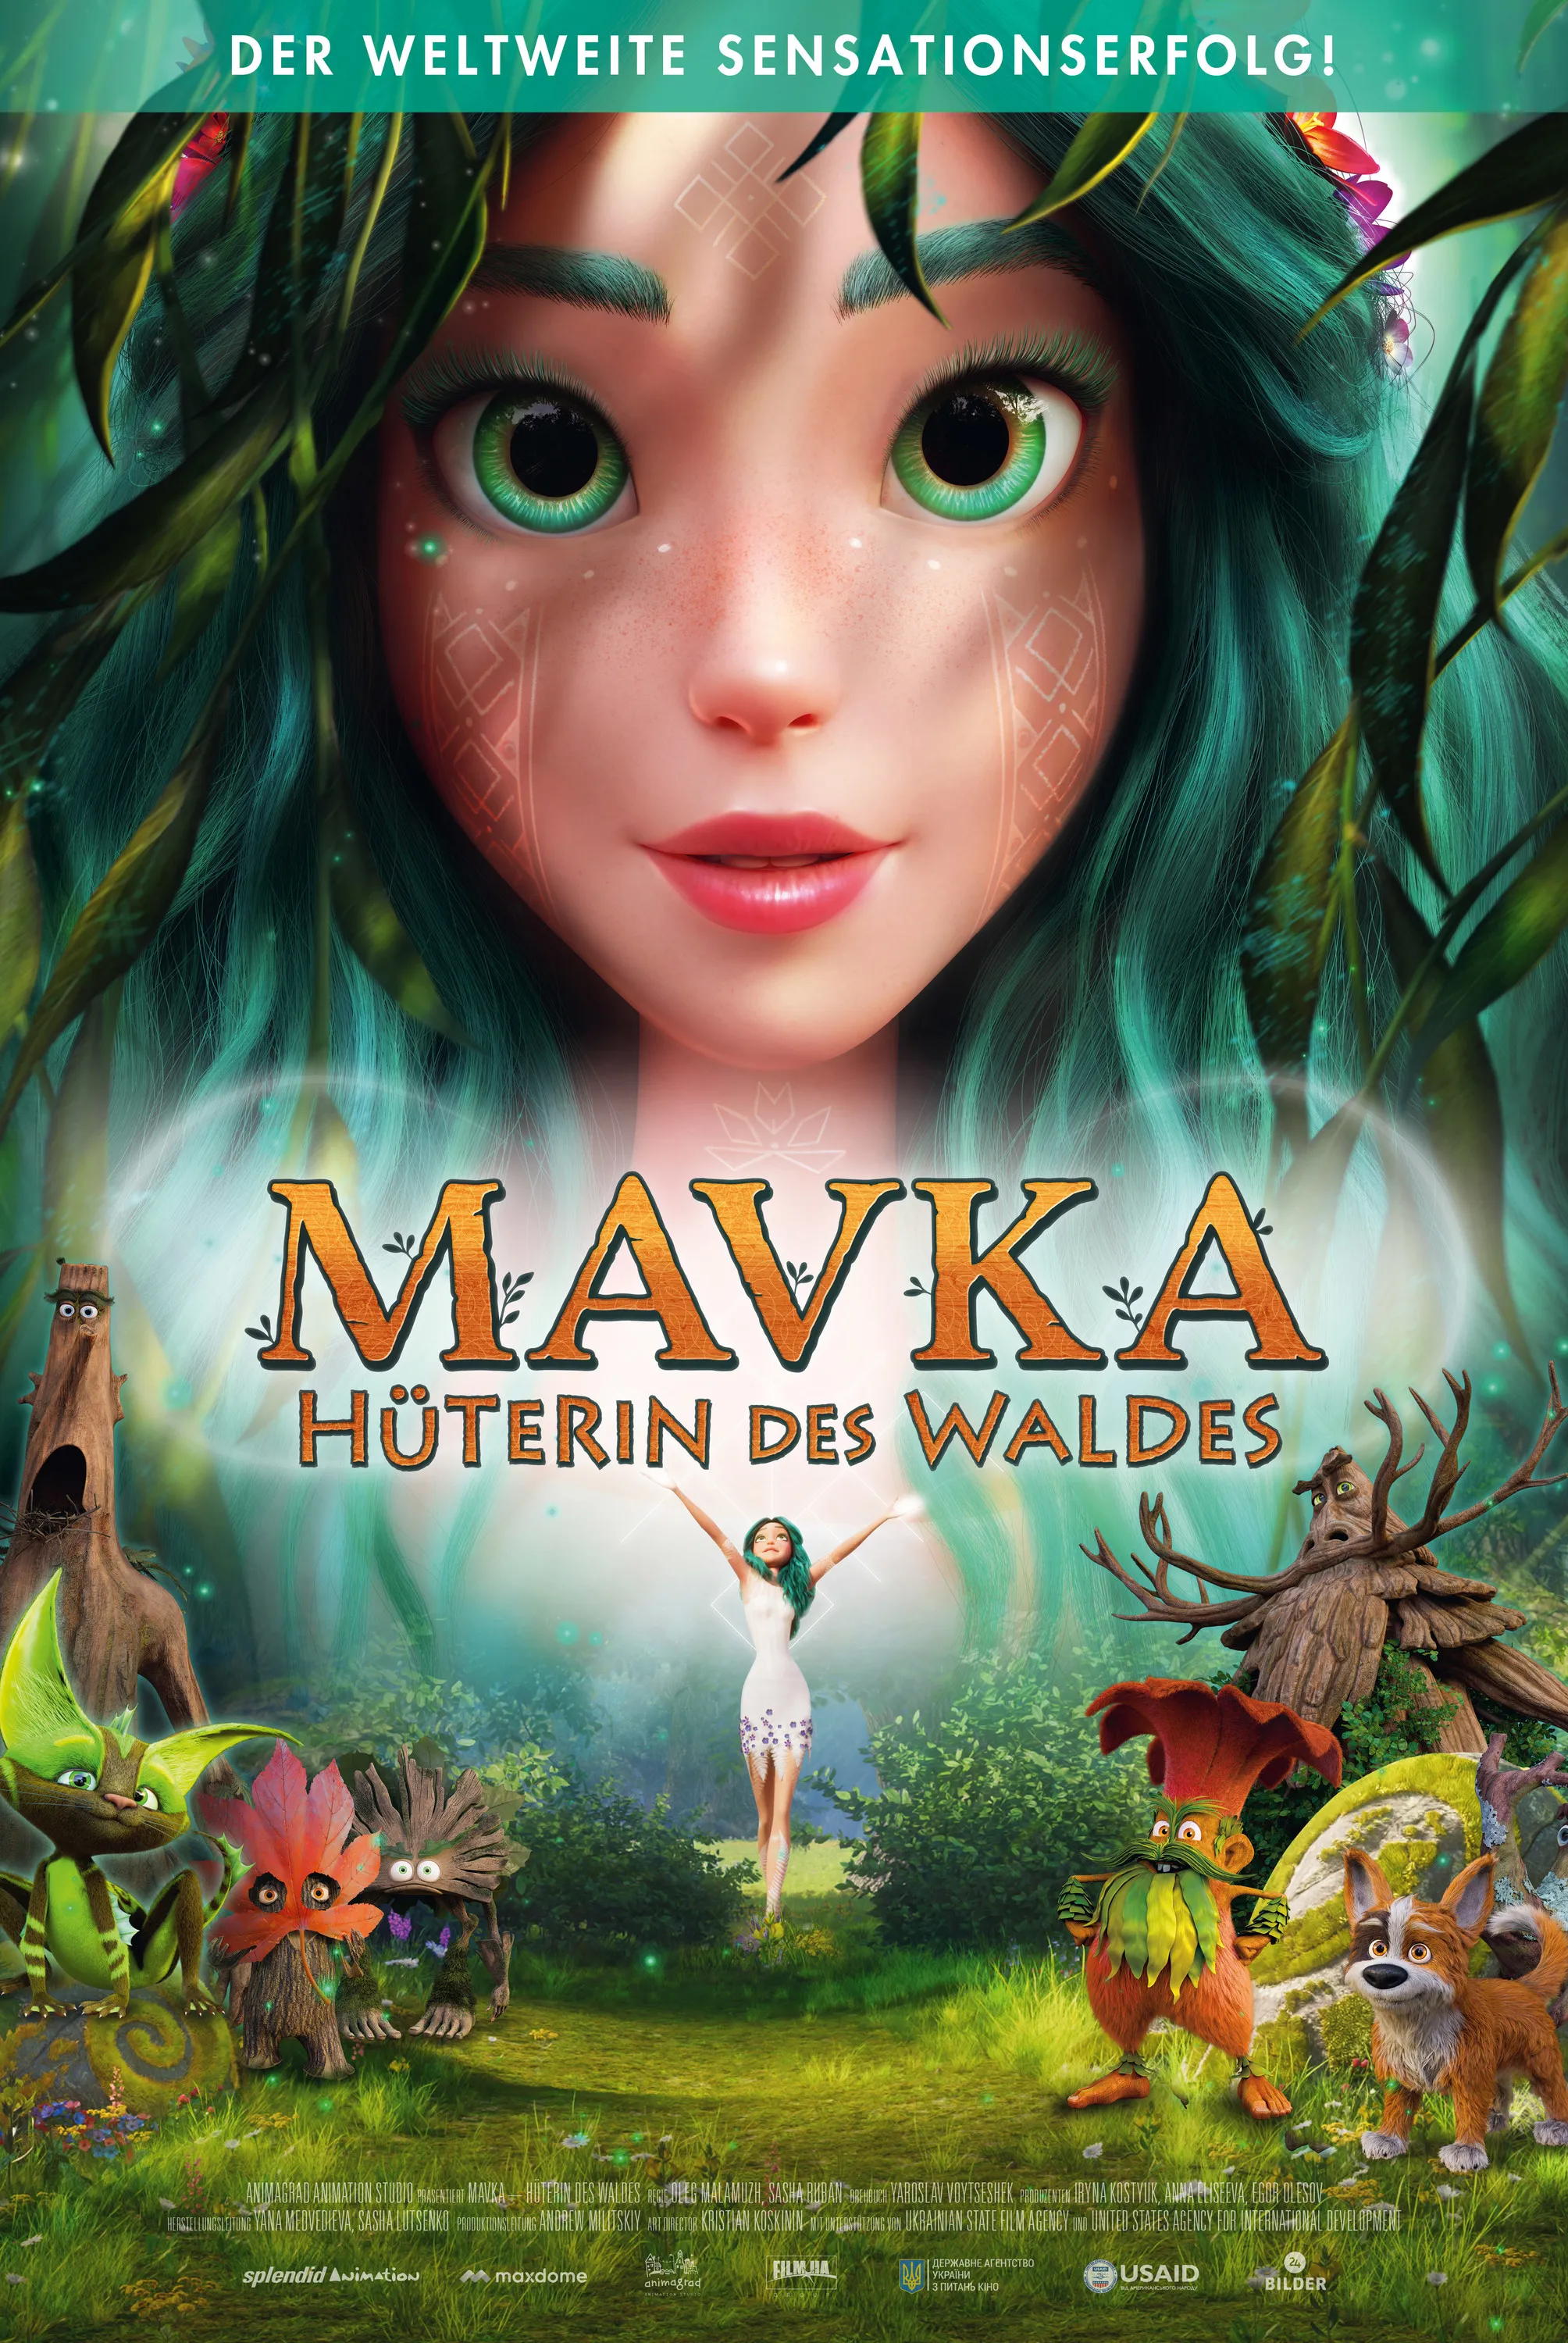 Mavka the forest song (movie review)